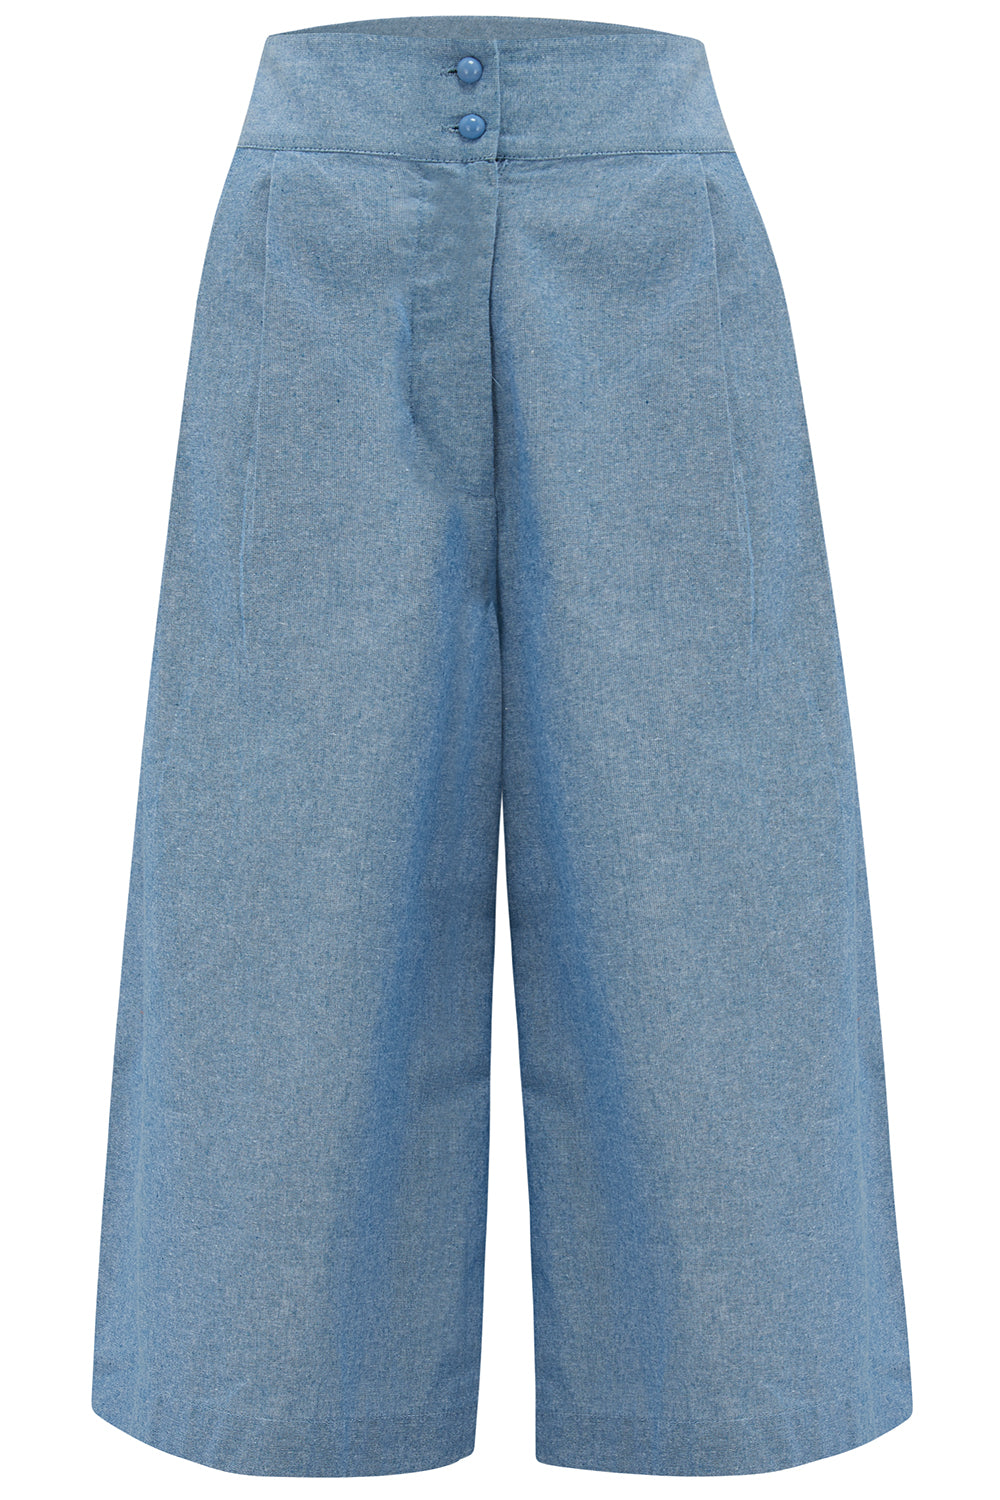 The "Sophia" Palazzo Culottes in Lightweight Denim, Cotton Chambray, Classic & Easy To Wear 1950s Vintage Inspired Style - True and authentic vintage style clothing, inspired by the Classic styles of CC41 , WW2 and the fun 1950s RocknRoll era, for everyday wear plus events like Goodwood Revival, Twinwood Festival and Viva Las Vegas Rockabilly Weekend Rock n Romance Rock n Romance